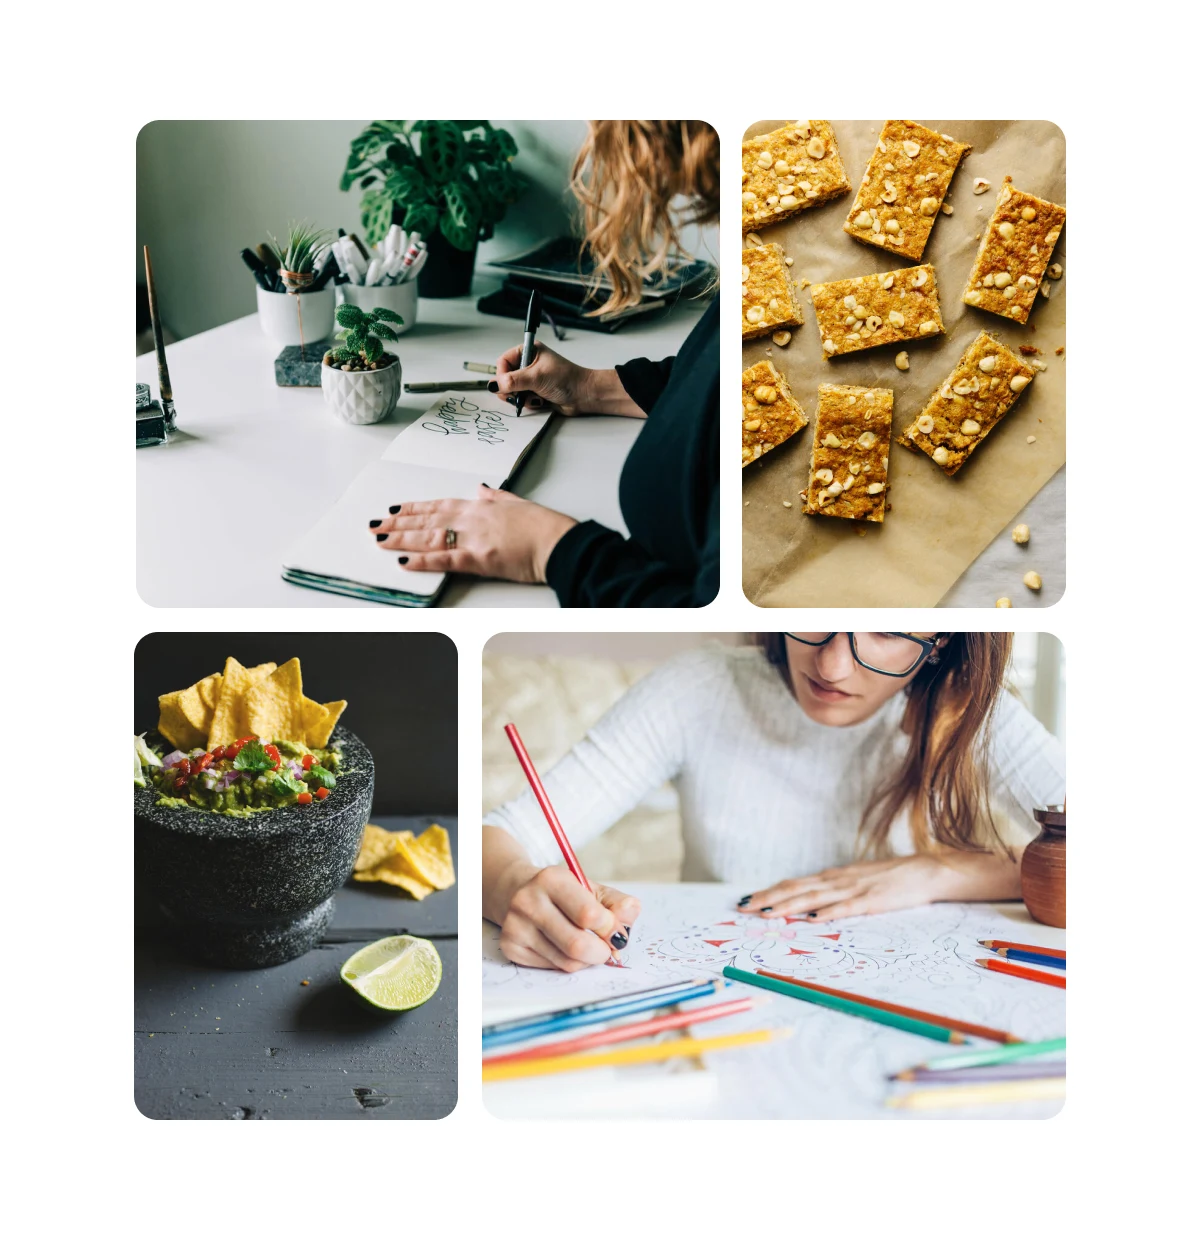  Pin grid featuring woman drawing in a notebook, granola bars, guacamole, and a woman coloring a picture